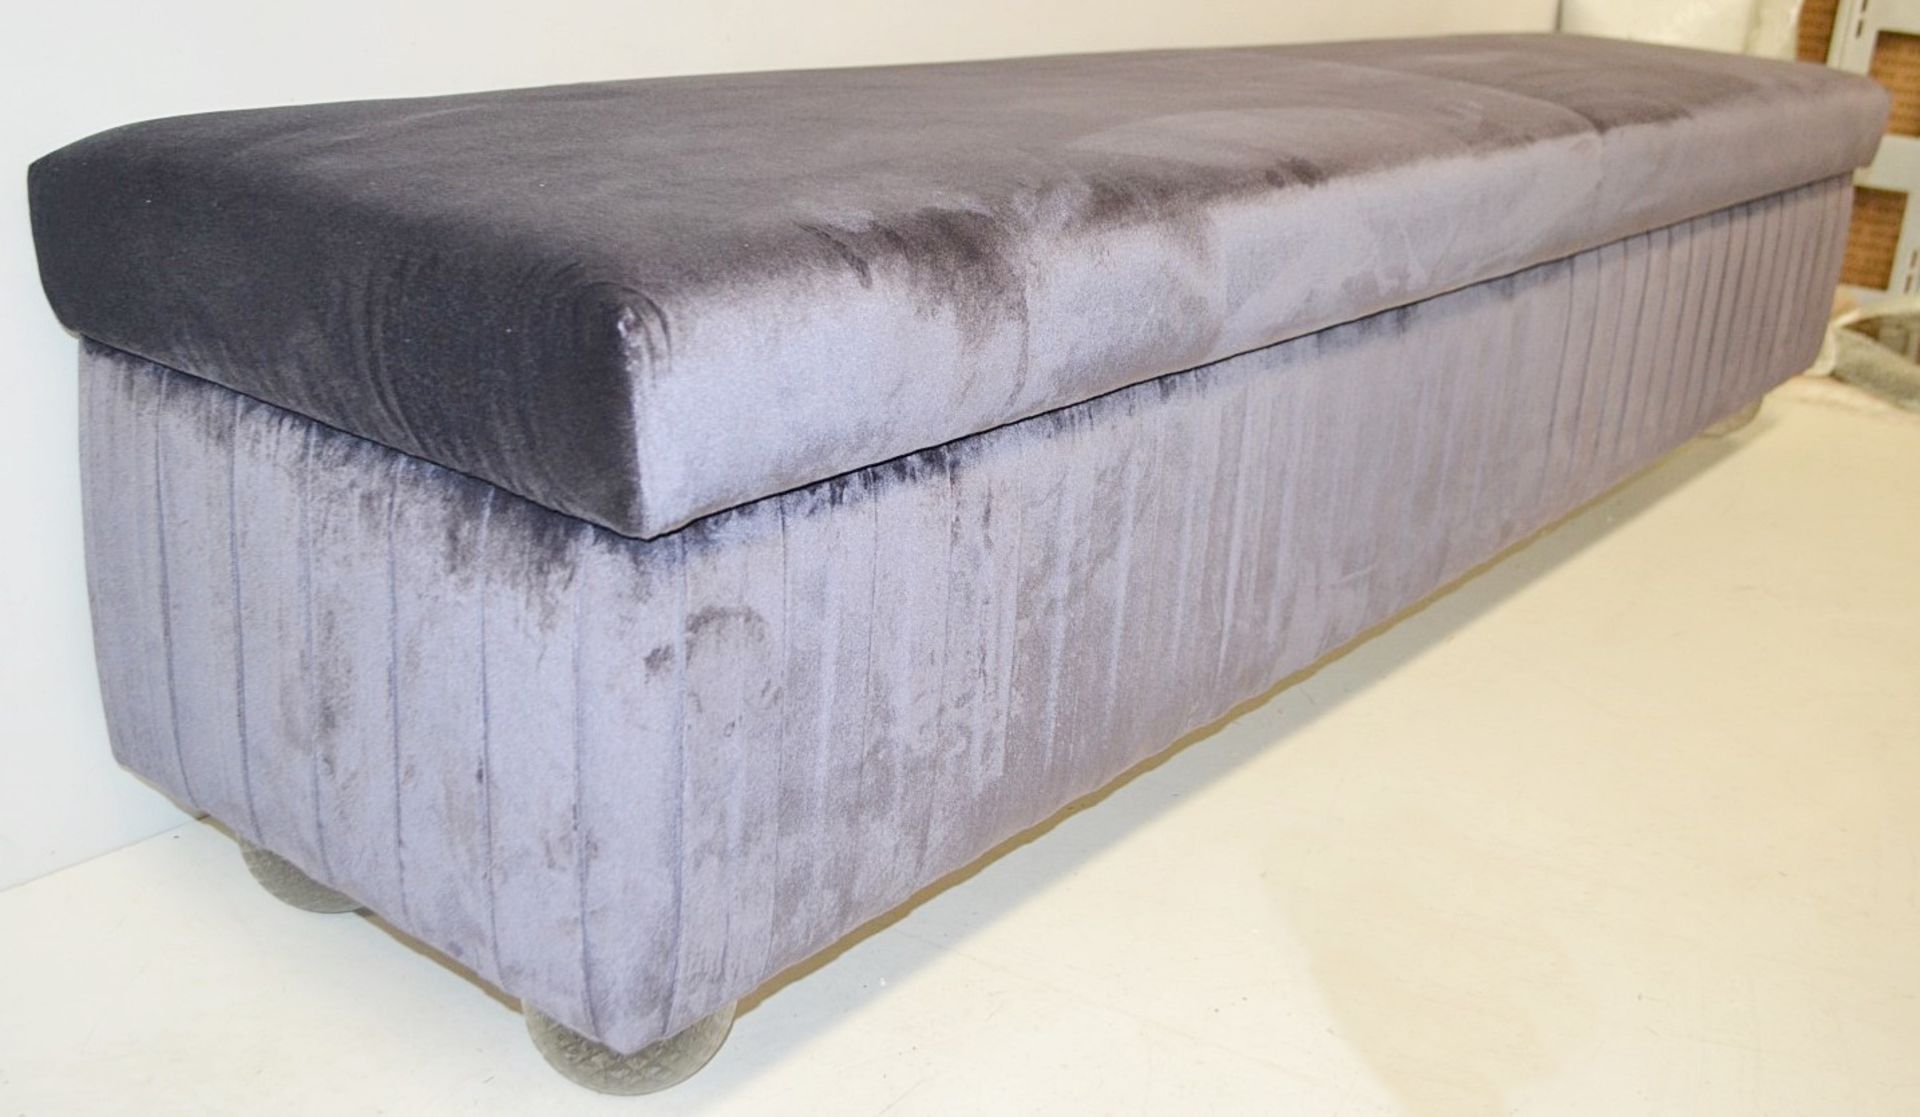 1 x REFLEX 'Plisse' Pleated Ottoman / Bedroom Bench In Plum With 'Illuminated' Spherical Glass Feet - Image 8 of 11